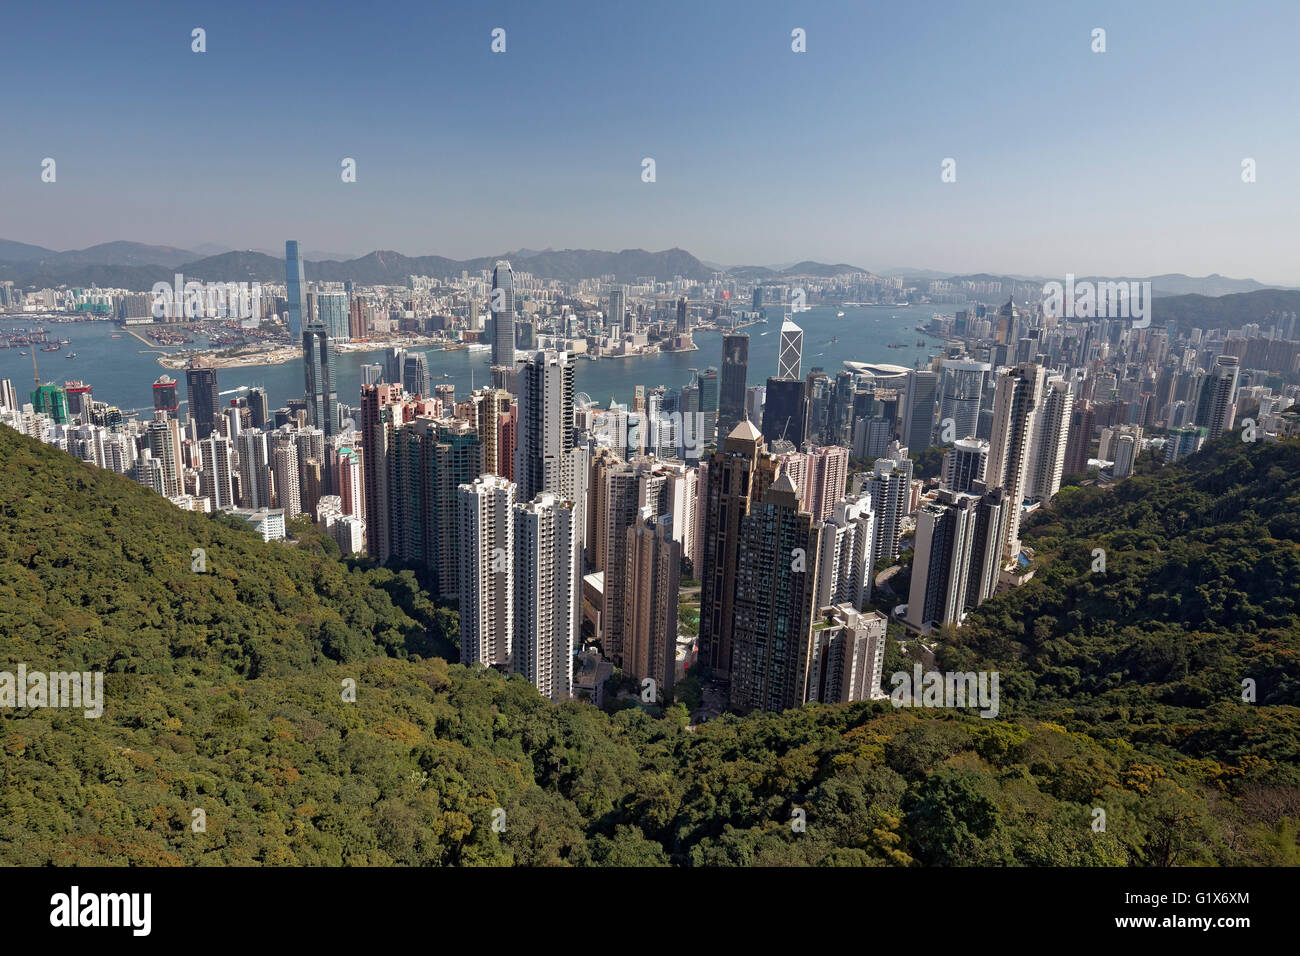 Skyscraper, skyscrapers in Central district, Victoria Harbour and Kowloon, view from The Peak, Victoria Peak, Hong Kong Island Stock Photo